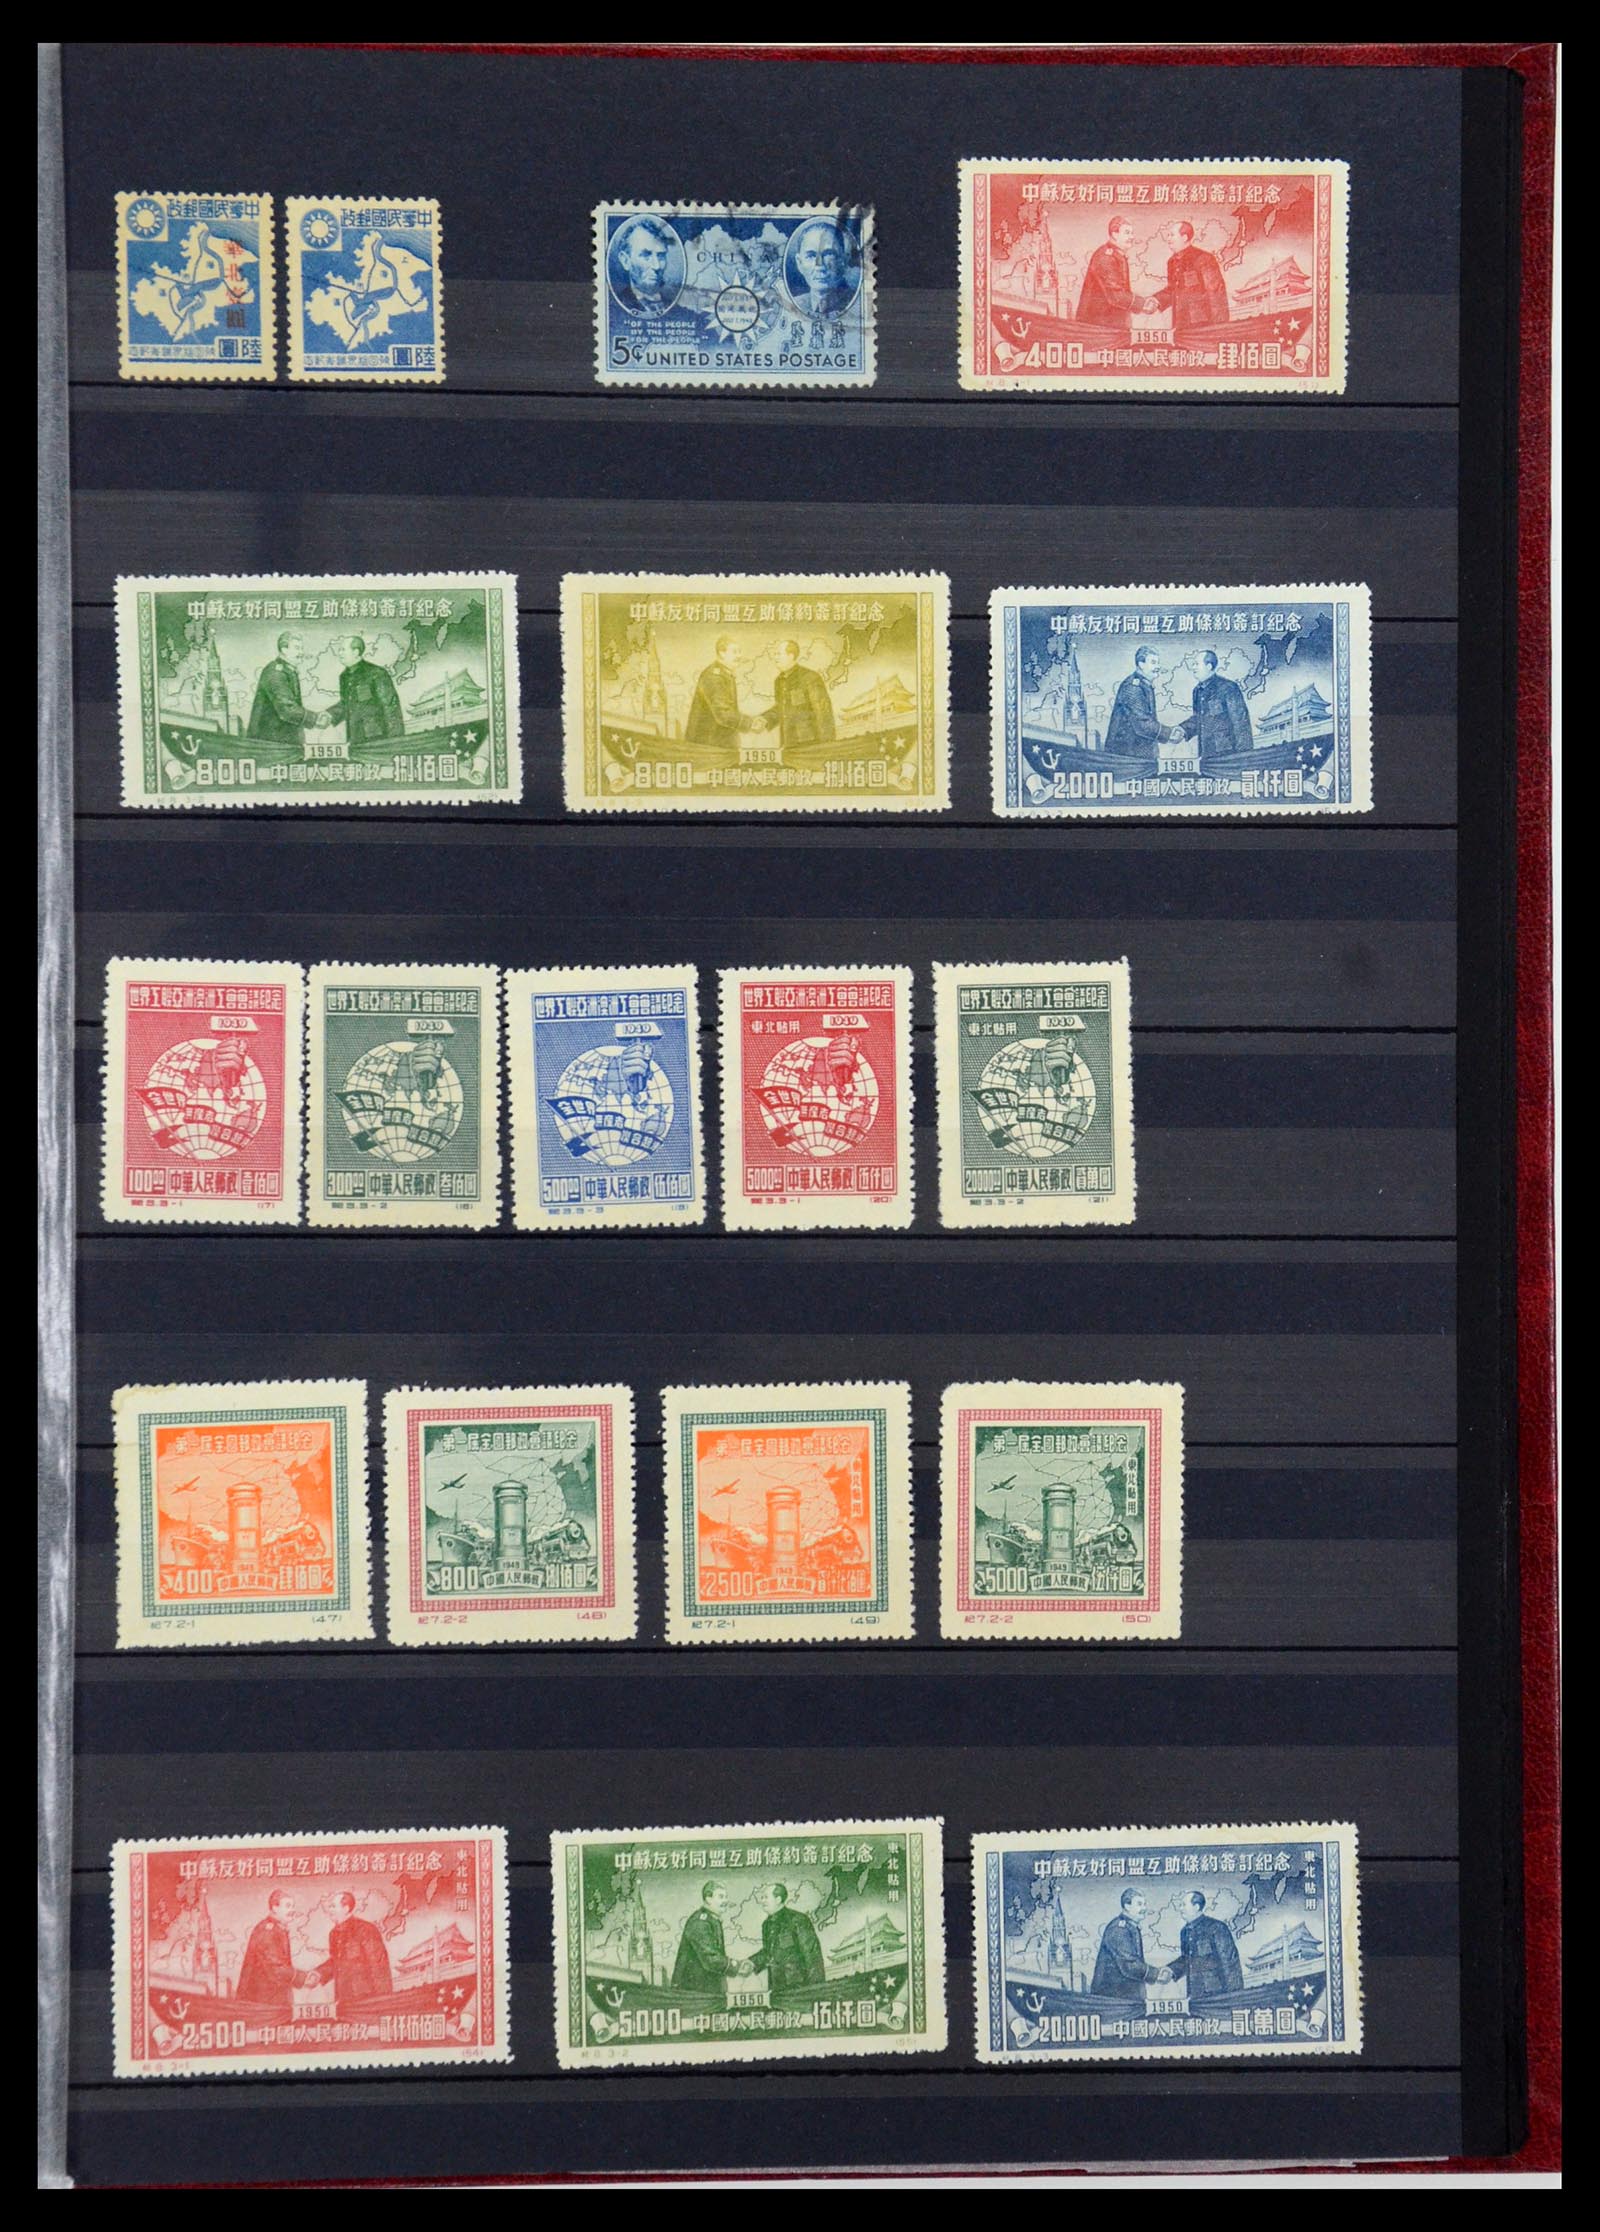 36238 131 - Stamp collection 36238 Motif maps 1900-2000.